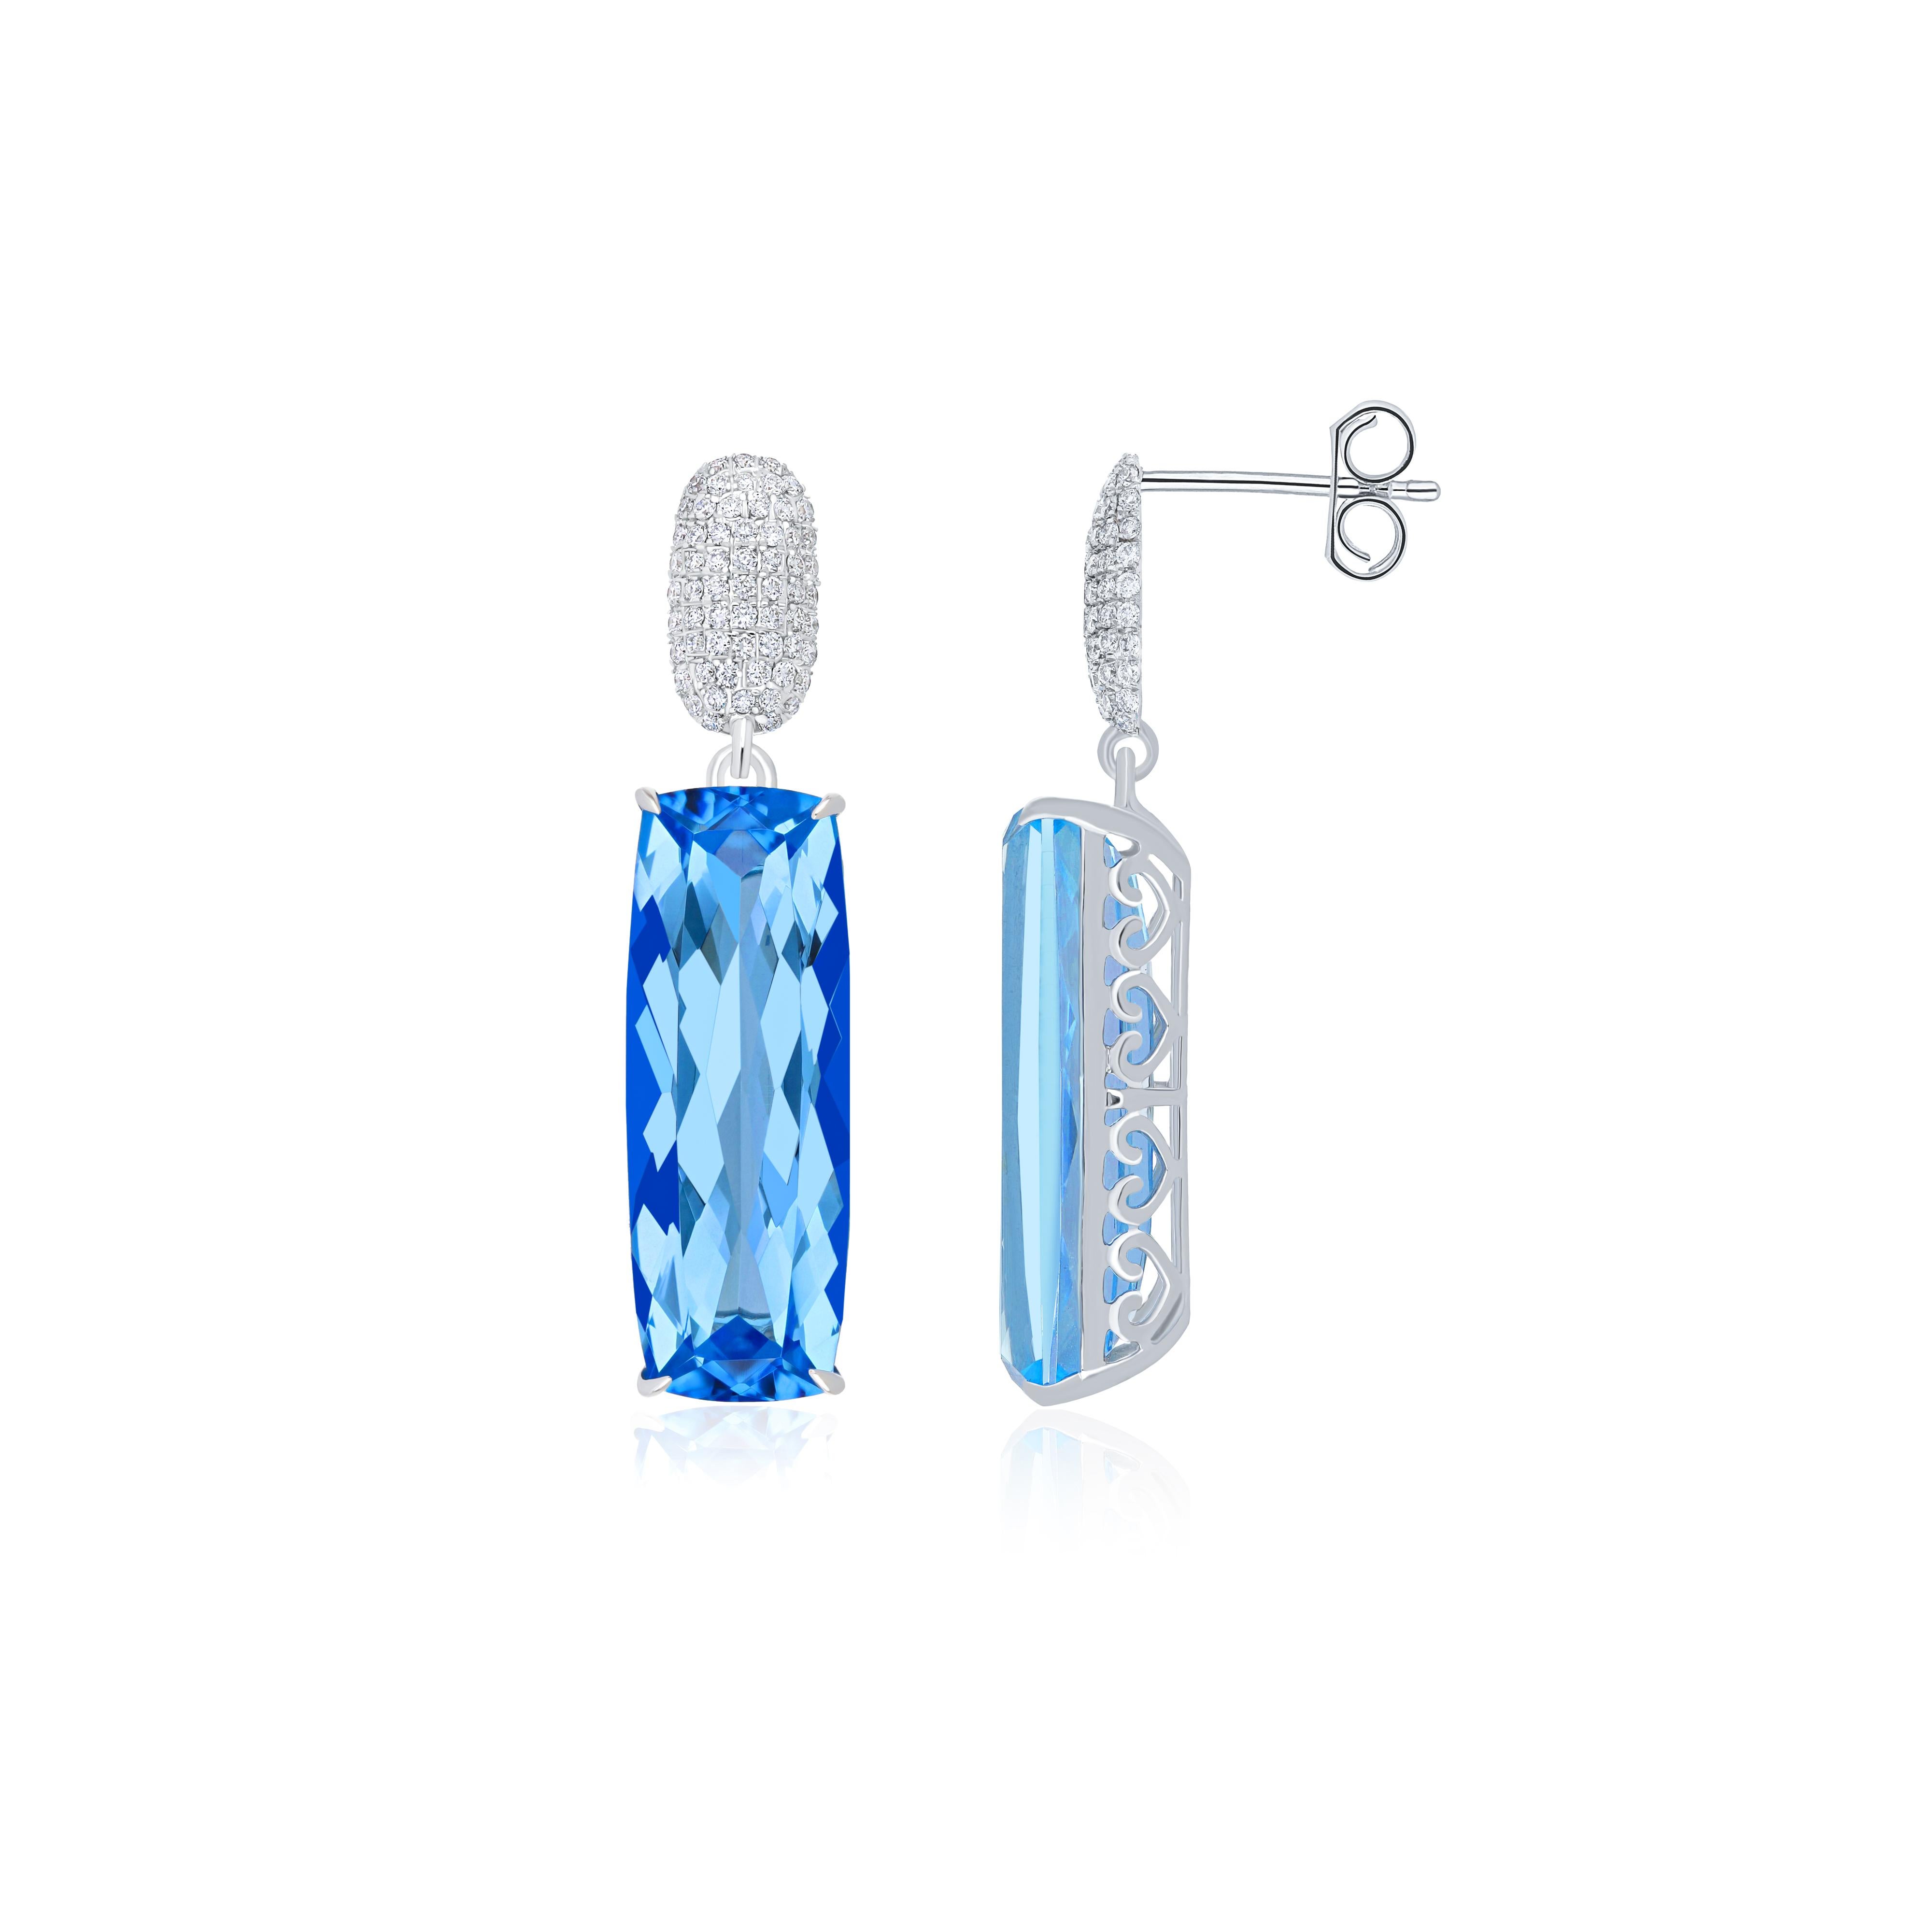 Elegant and Exquisitely Detailed White Gold Earring set with Cushion Round Corner Shape Sky Blue Topaz with Checker Cut in weighing approx. 9.80Cts, and Swiss Blue Topaz in Cushion Round Corner with Checker cut in weighing approx. 9.80Cts, and